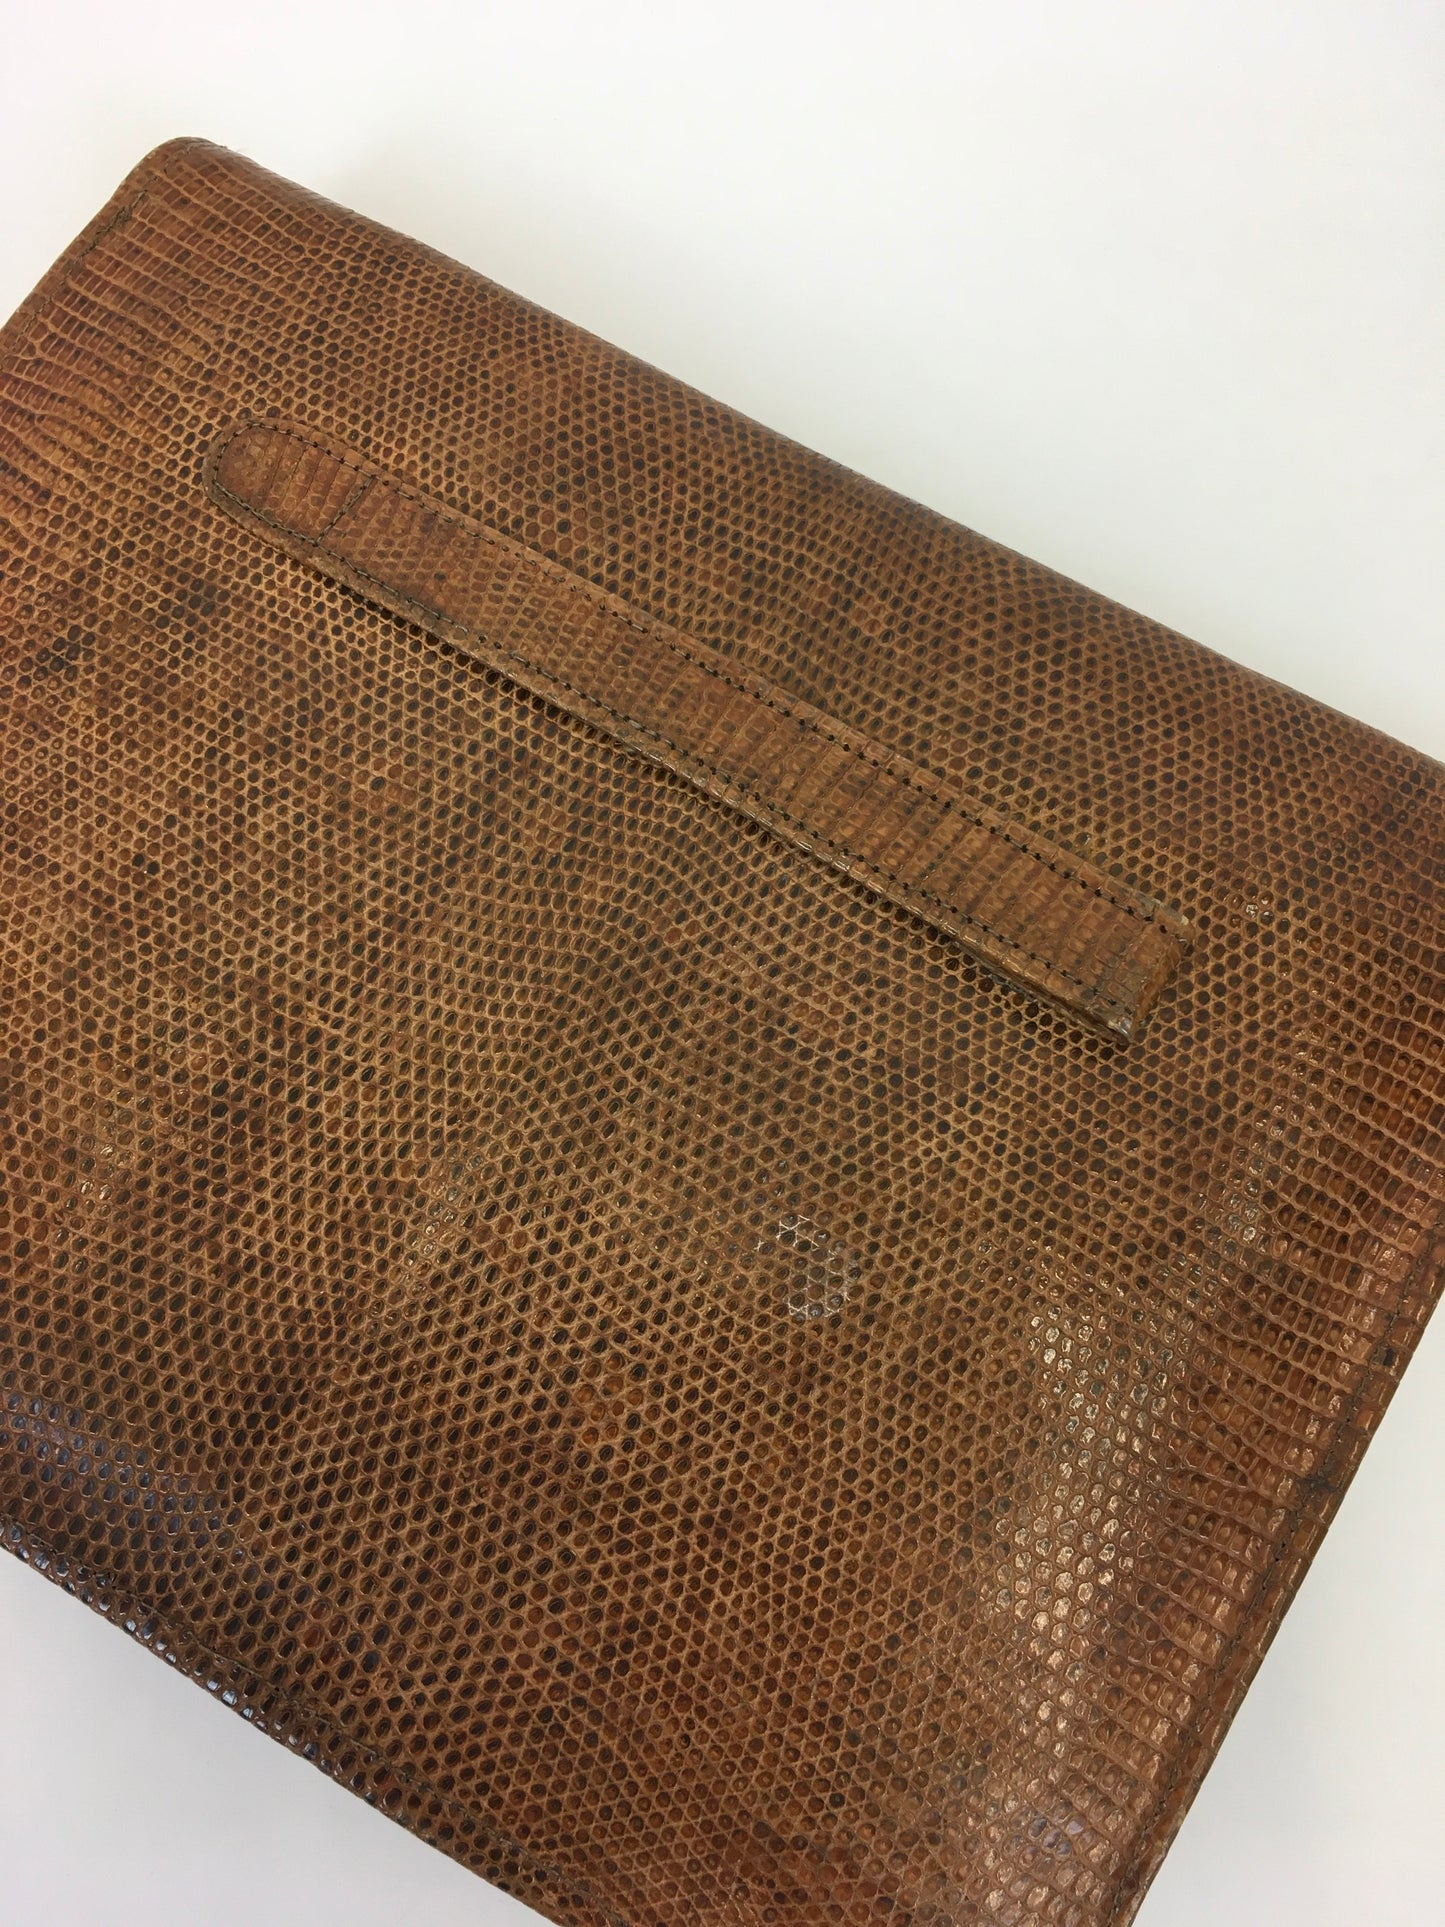 Original 1930’s Skin Envelope Clutch Handbag - With A Lovely Interior and Strong Clasp